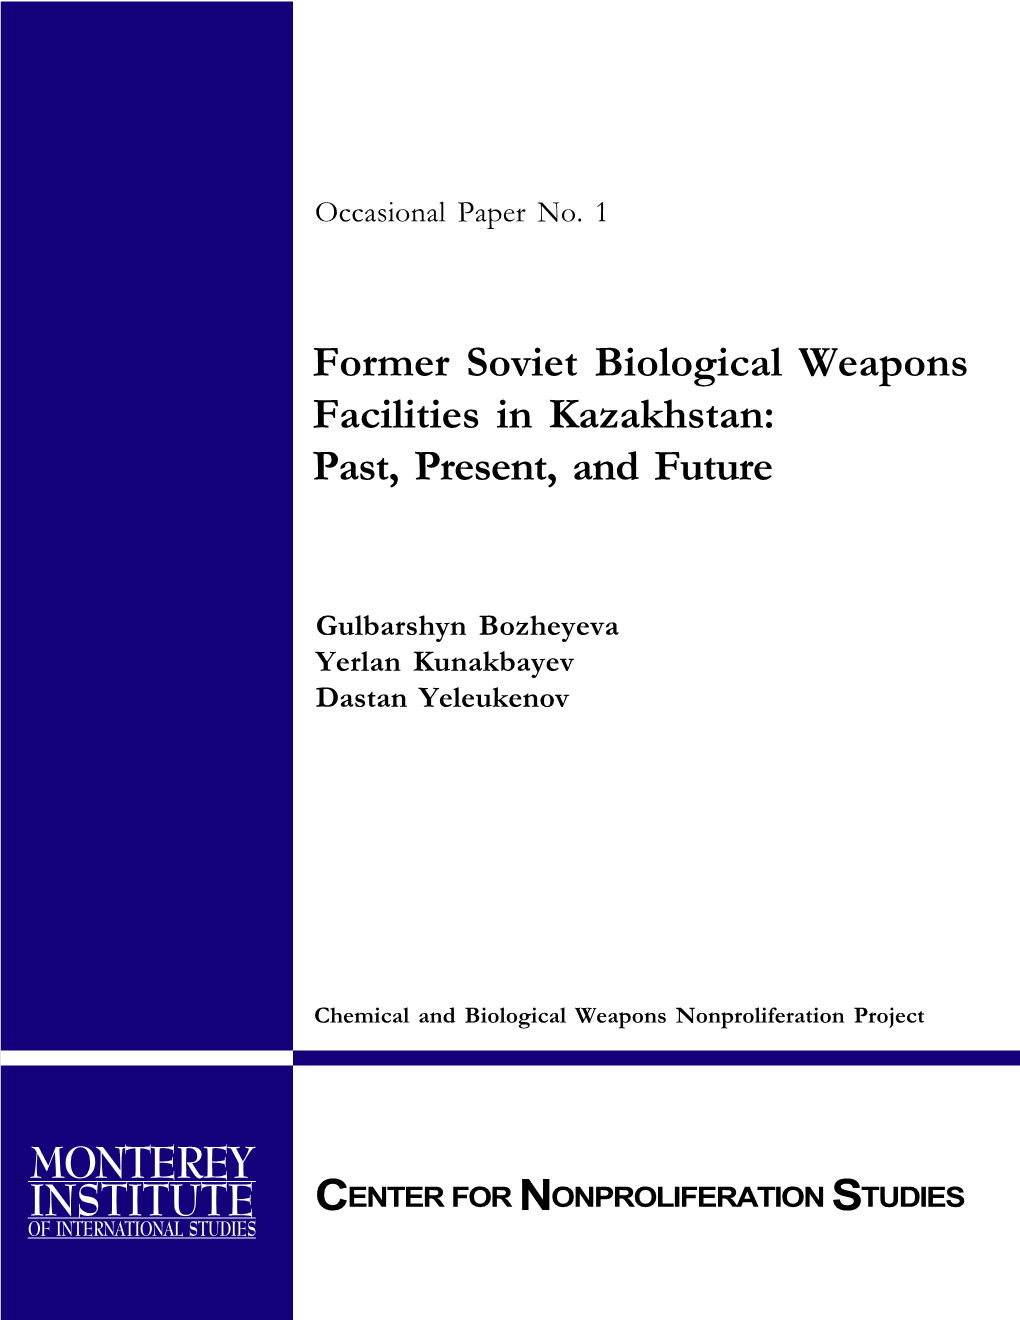 Former Soviet Biological Weapons Facilities in Kazakhstan: Past, Present, and Future